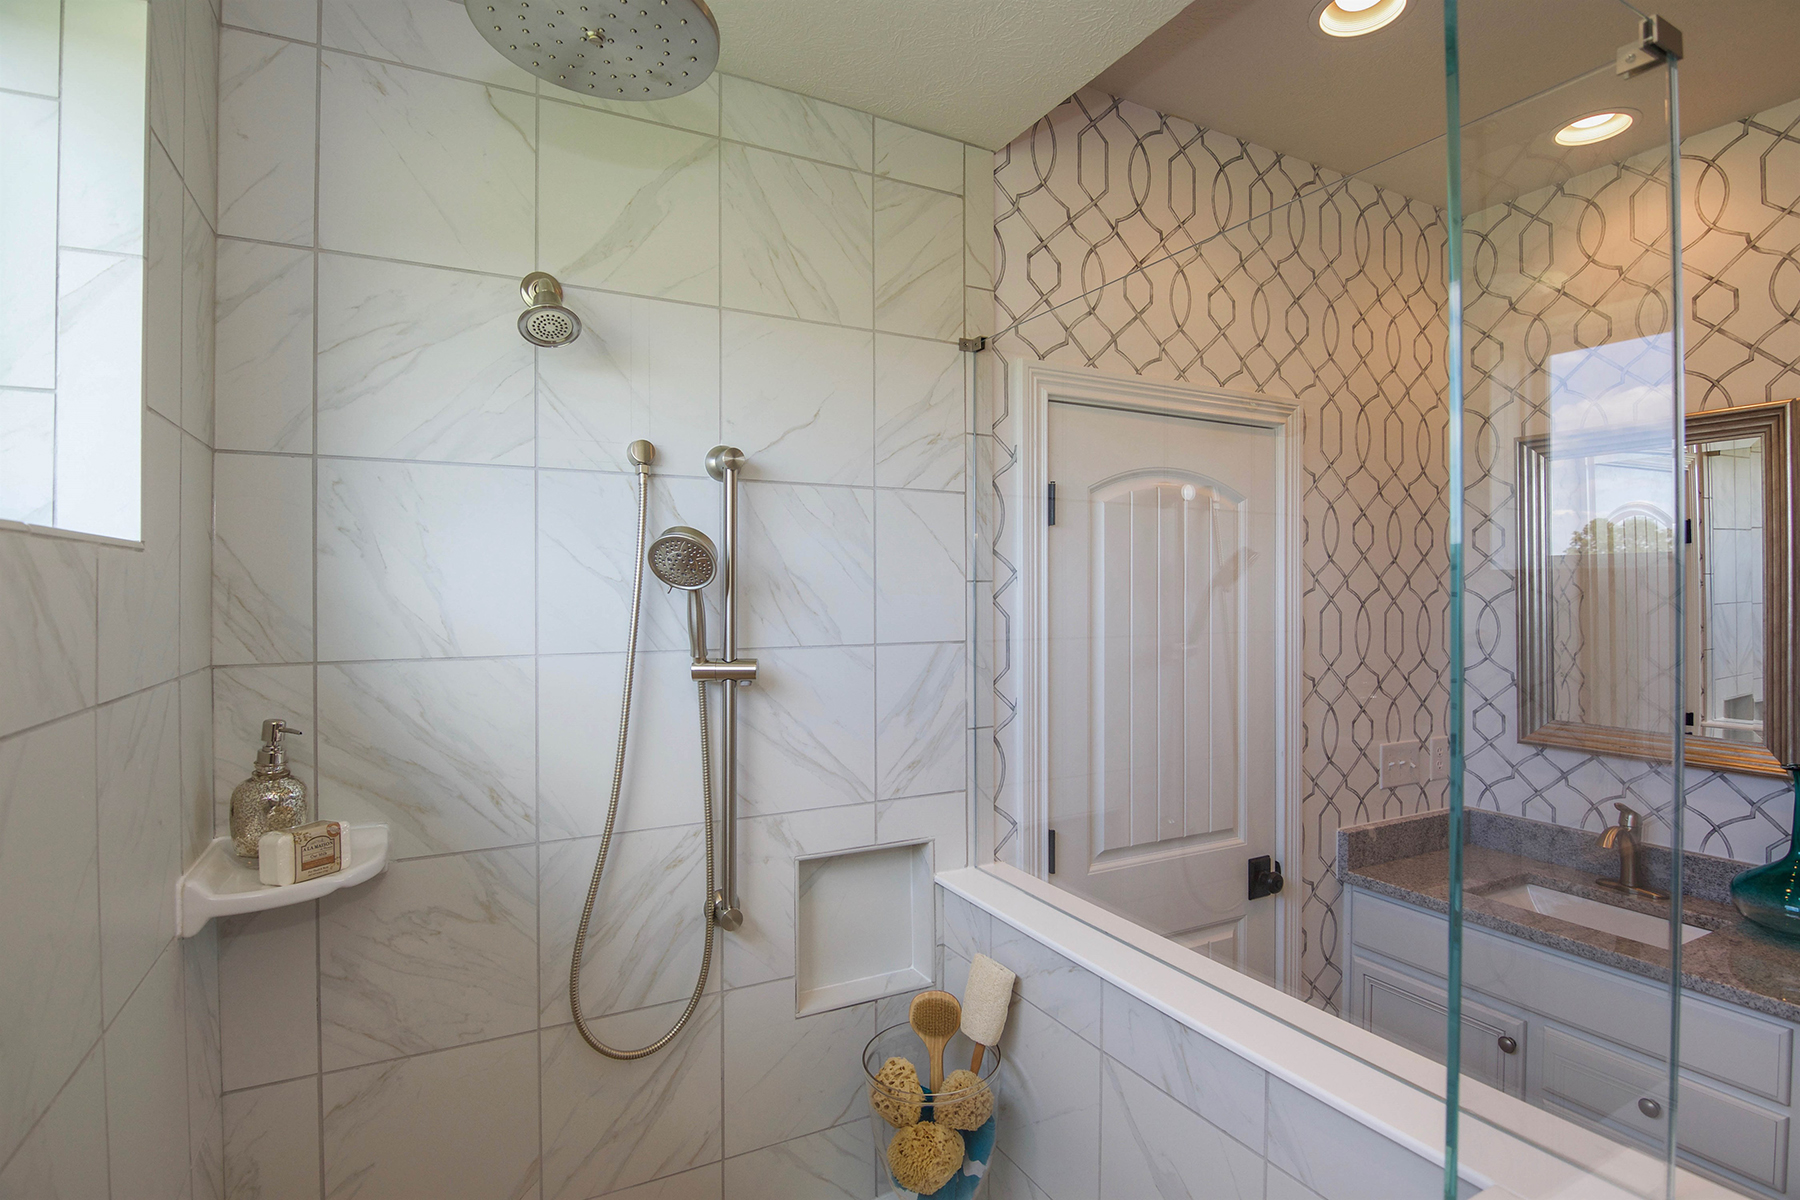 [Marble-Look Tiled Shower With Organizer on Floor]